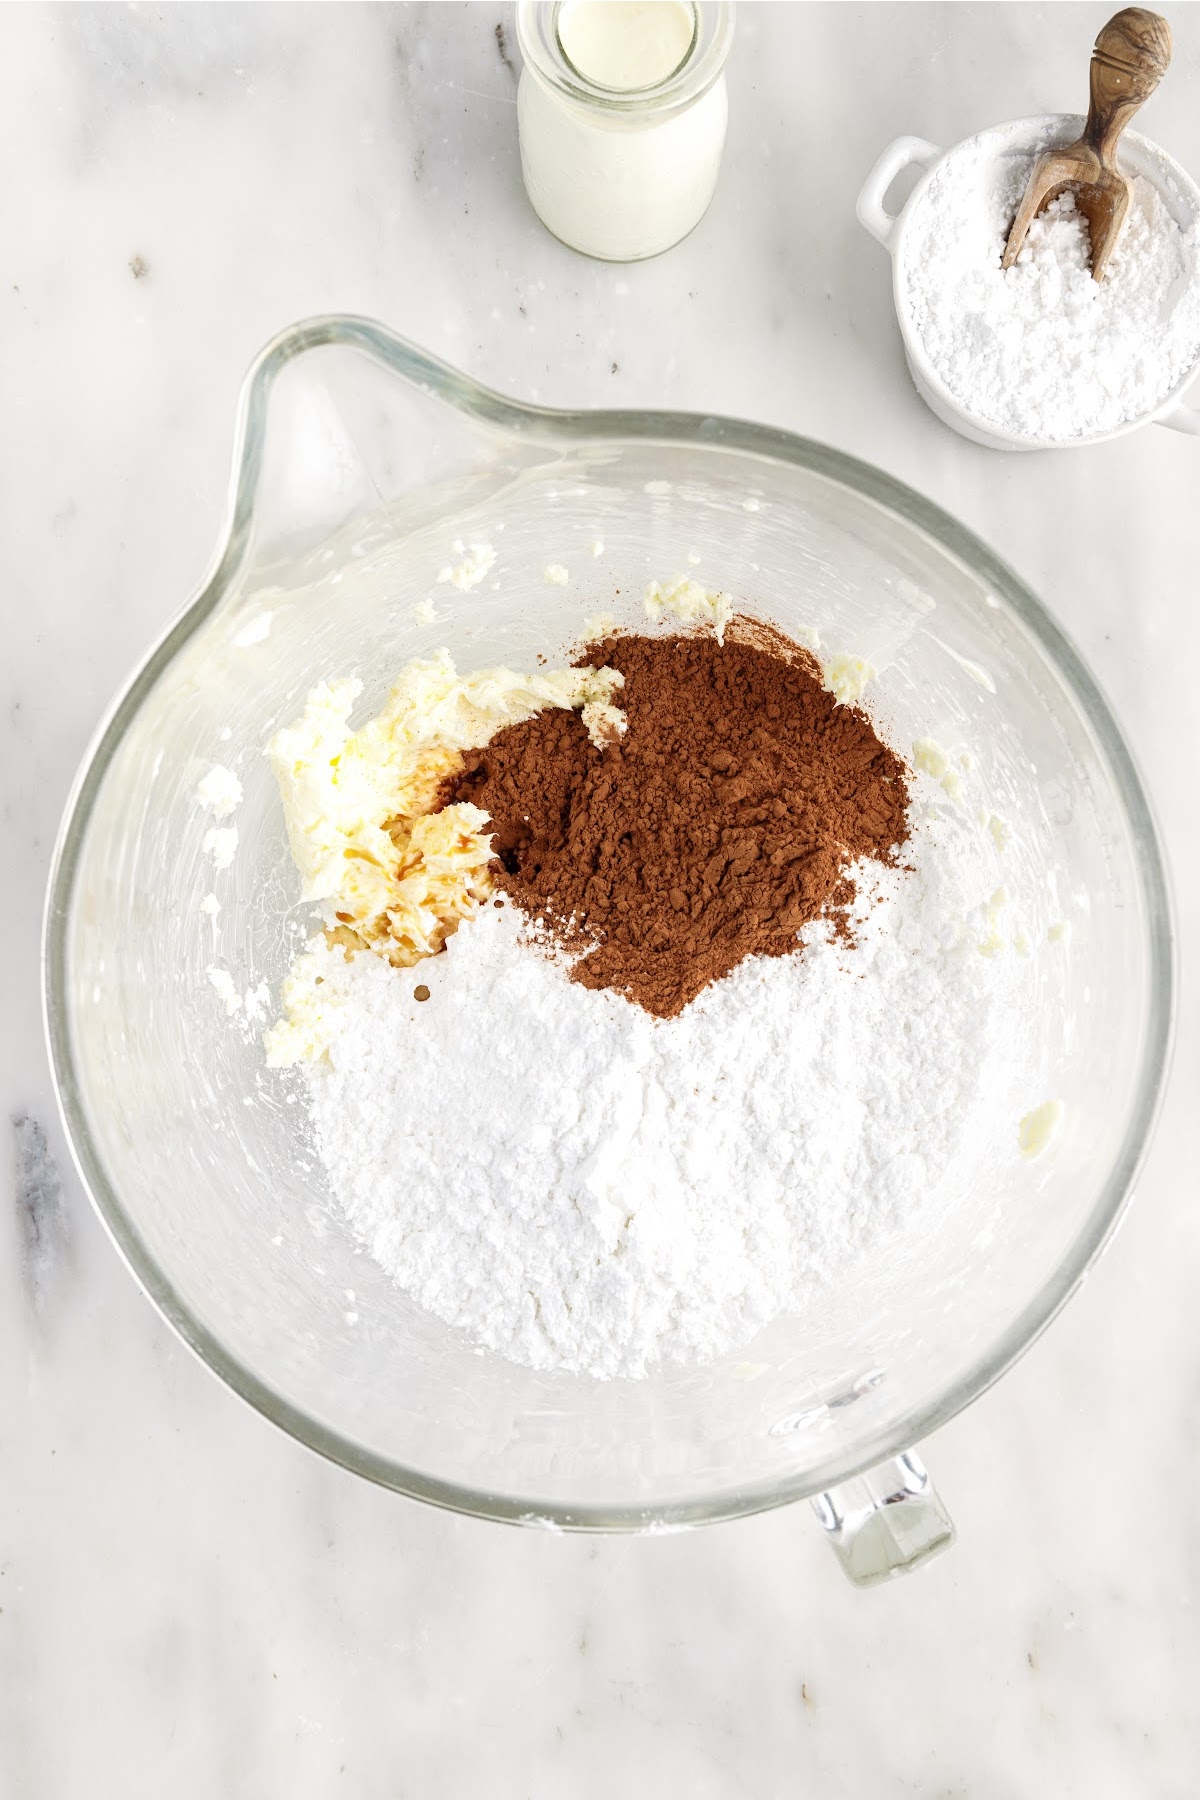 Powdered sugar, cocoa powder, and butter in a mixing bowl.